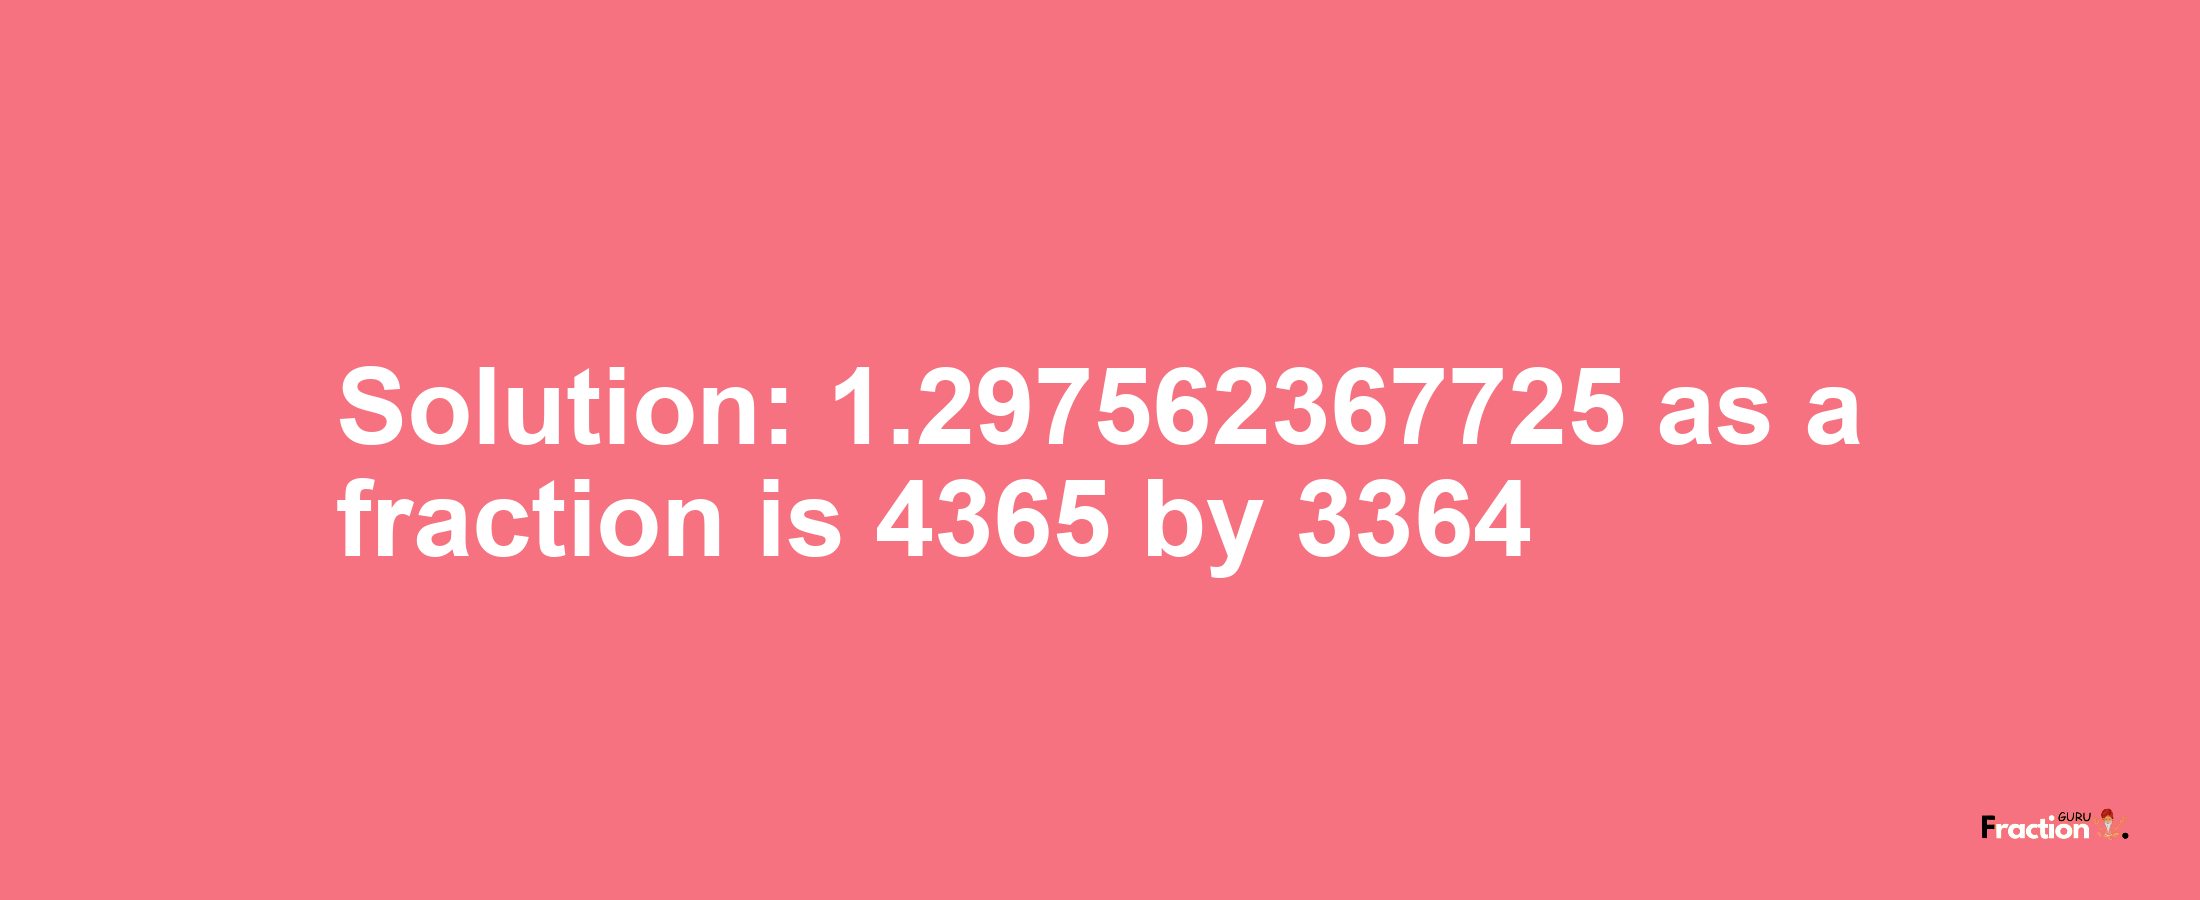 Solution:1.297562367725 as a fraction is 4365/3364